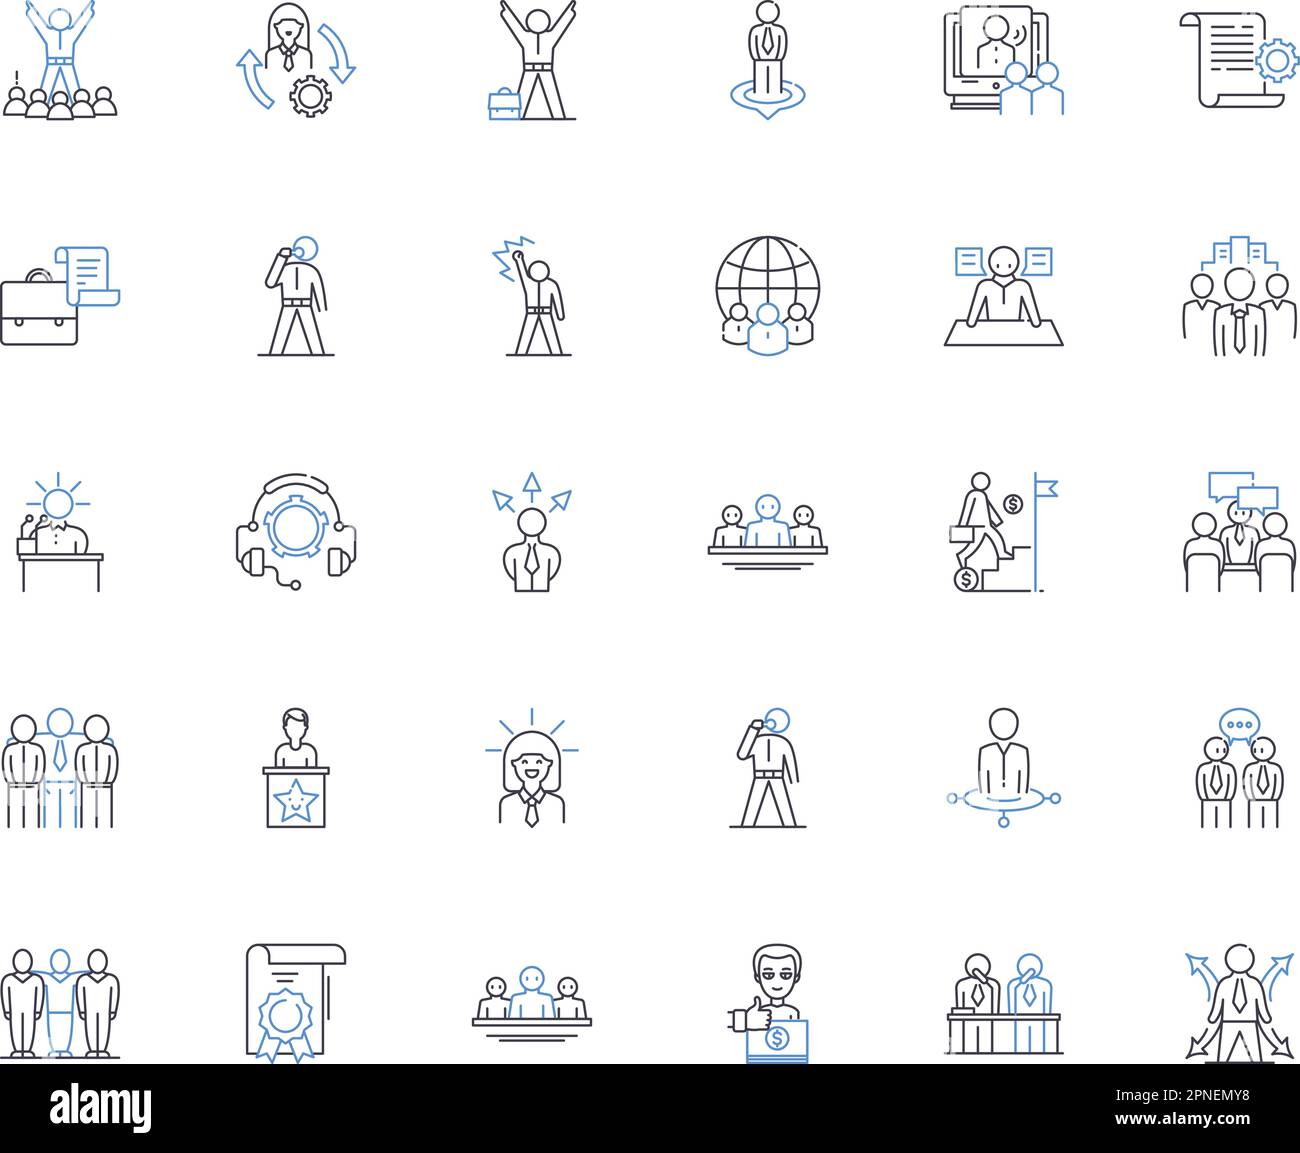 Public affairs line icons collection. Politics, Government, Society, Democracy, Advocacy, Legislation, Activism vector and linear illustration. Power Stock Vector